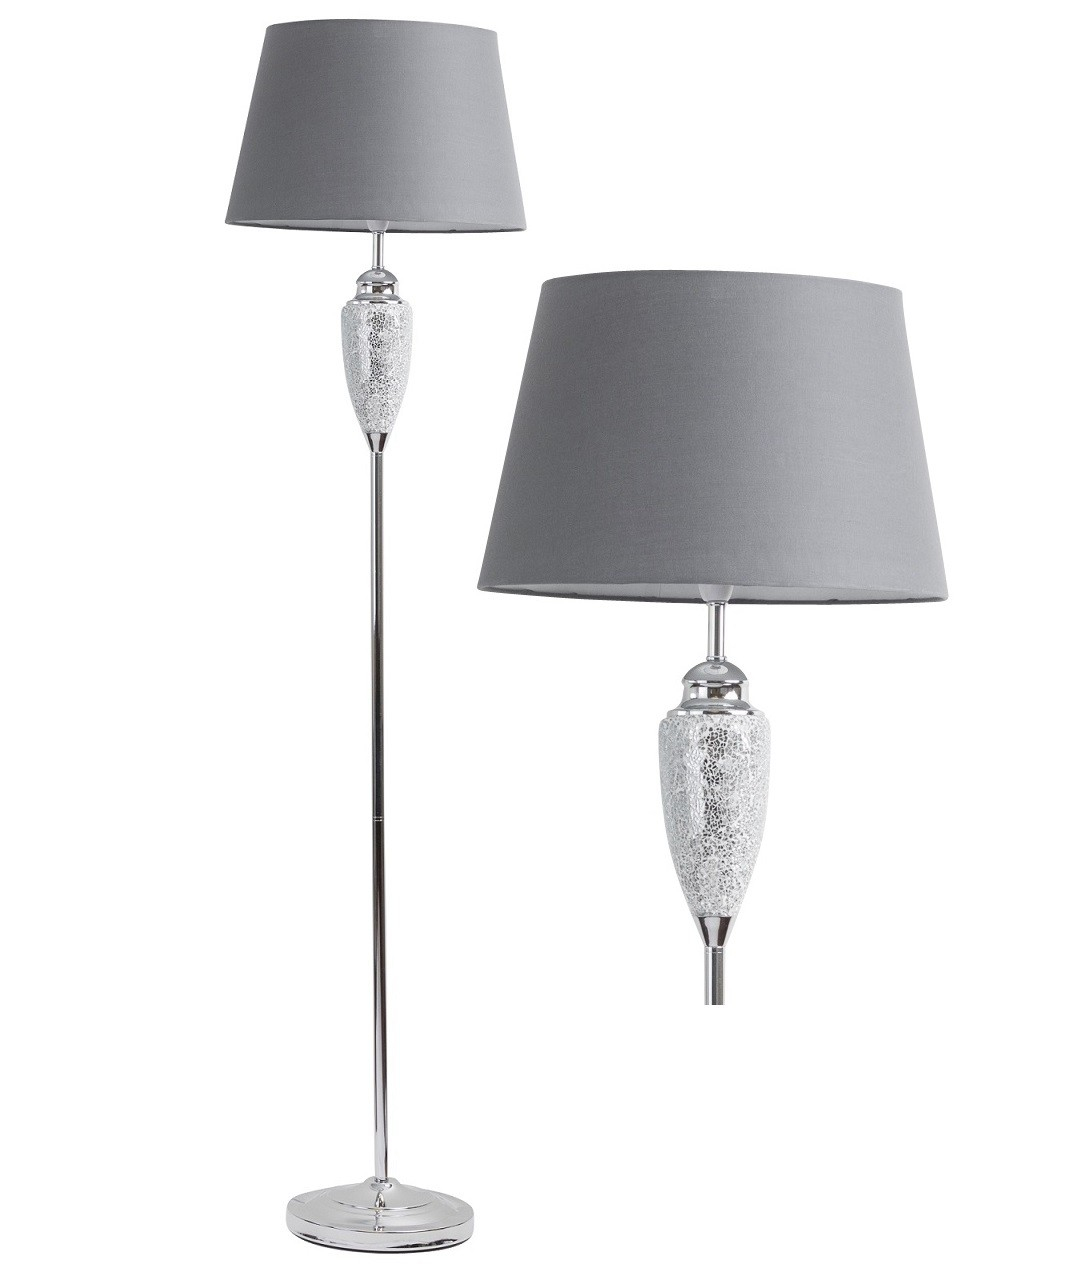 Mirrored Crackle Glass Floor Lamp With Grey Shade regarding dimensions 1088 X 1280